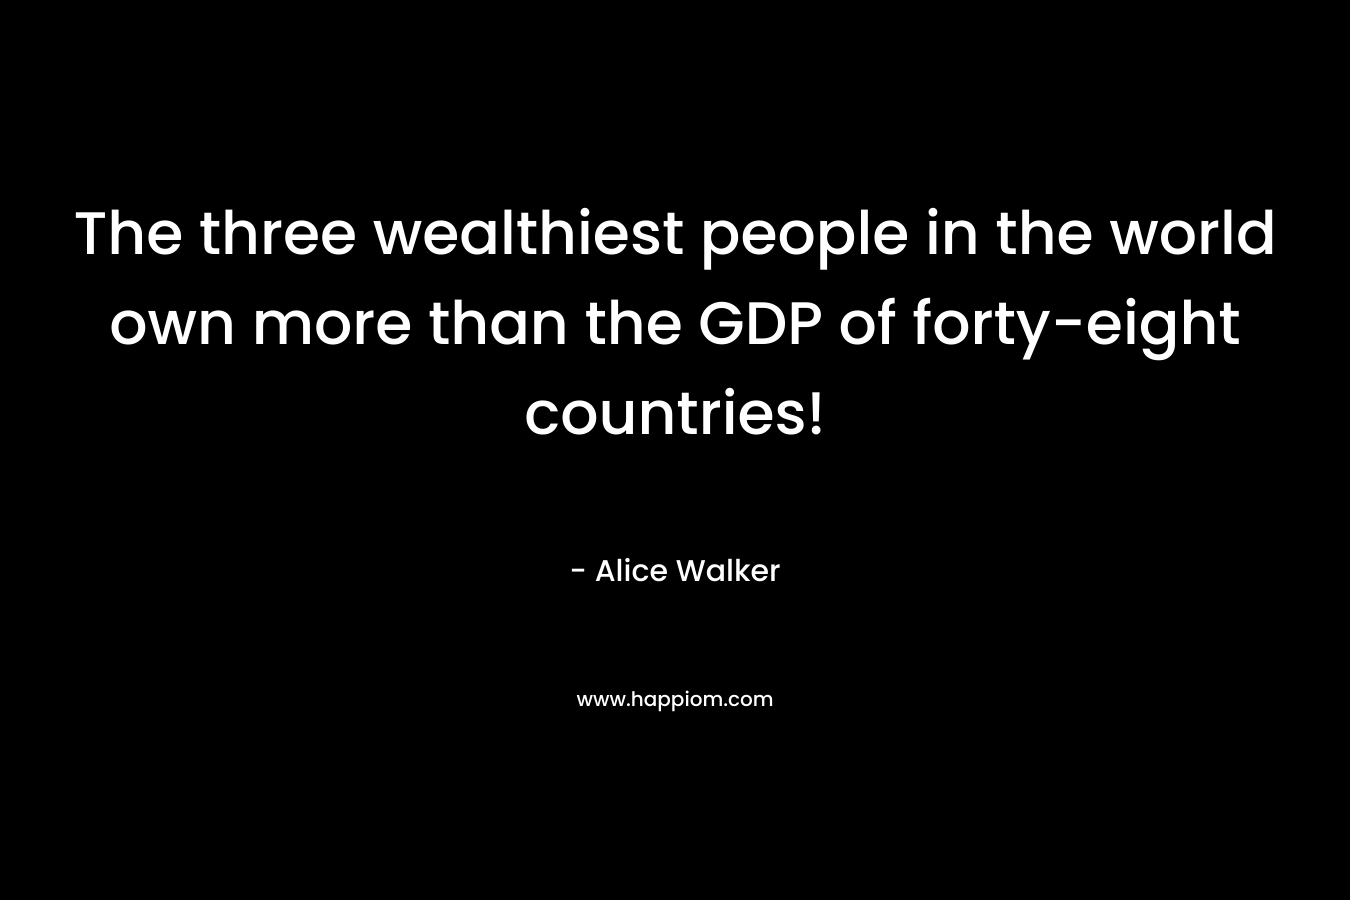 The three wealthiest people in the world own more than the GDP of forty-eight countries!